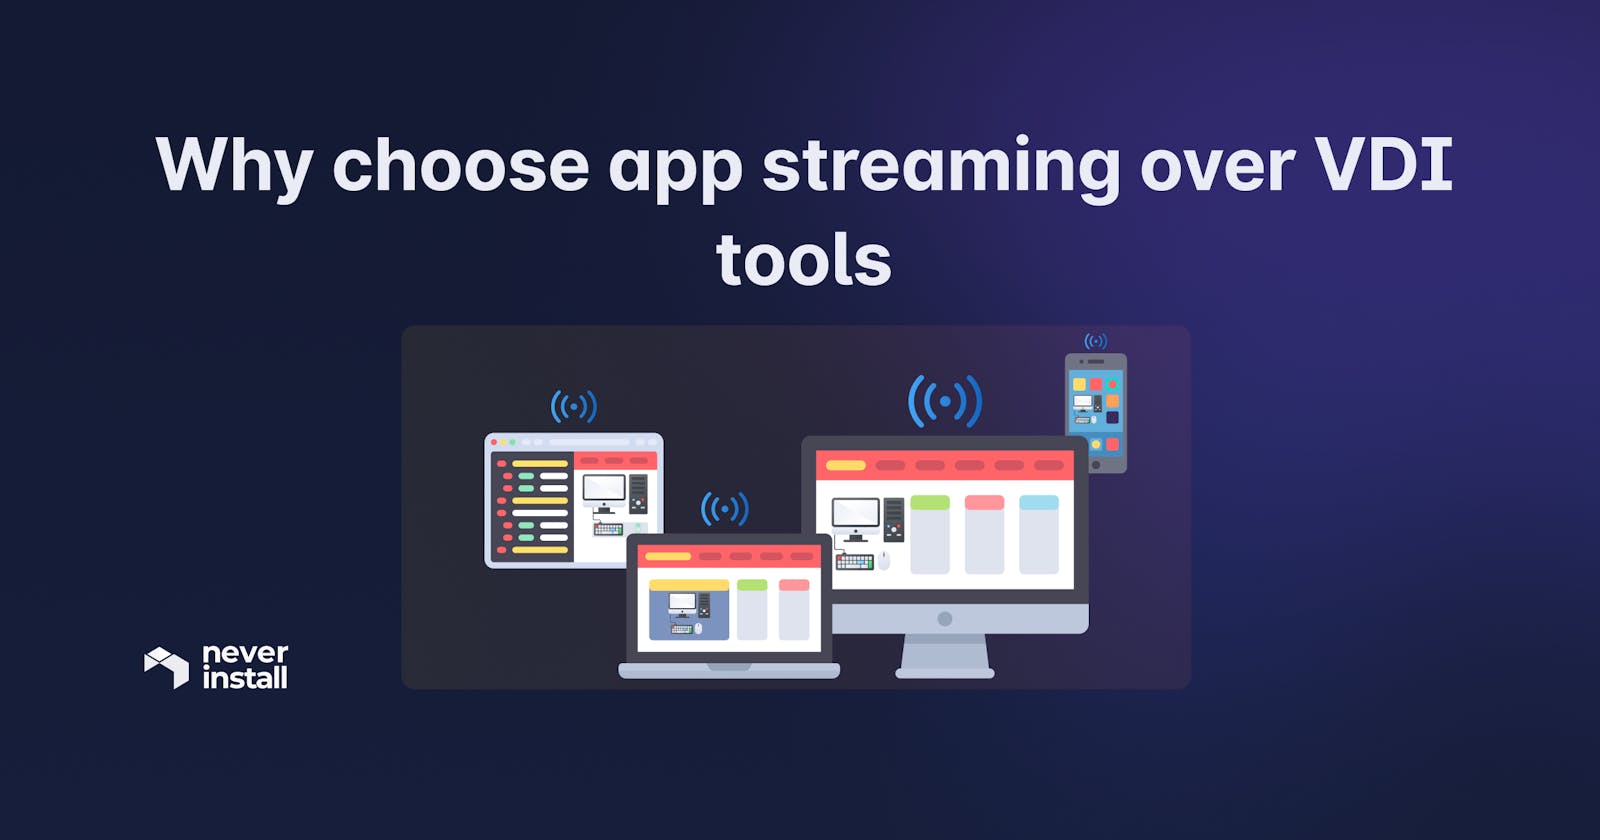 Why choose application streaming over VDI tools